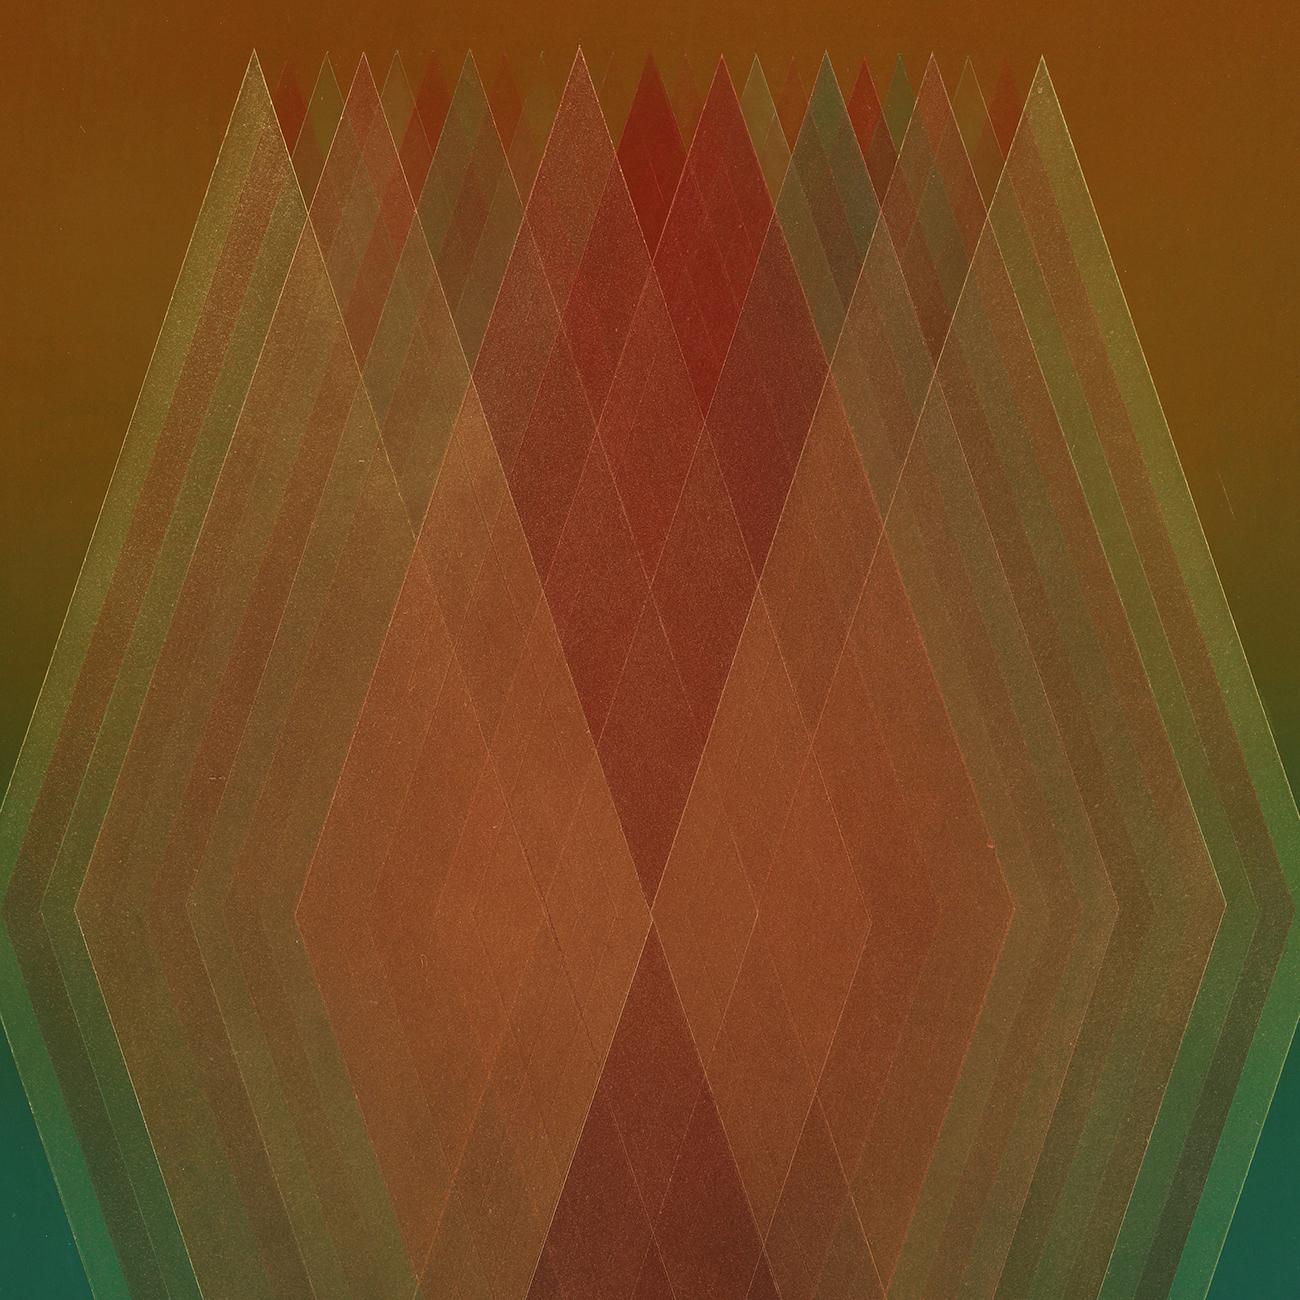 Prism (Copper Orange-Green) (Abstract painting) - Brown Abstract Painting by Bernadette Jiyong Frank